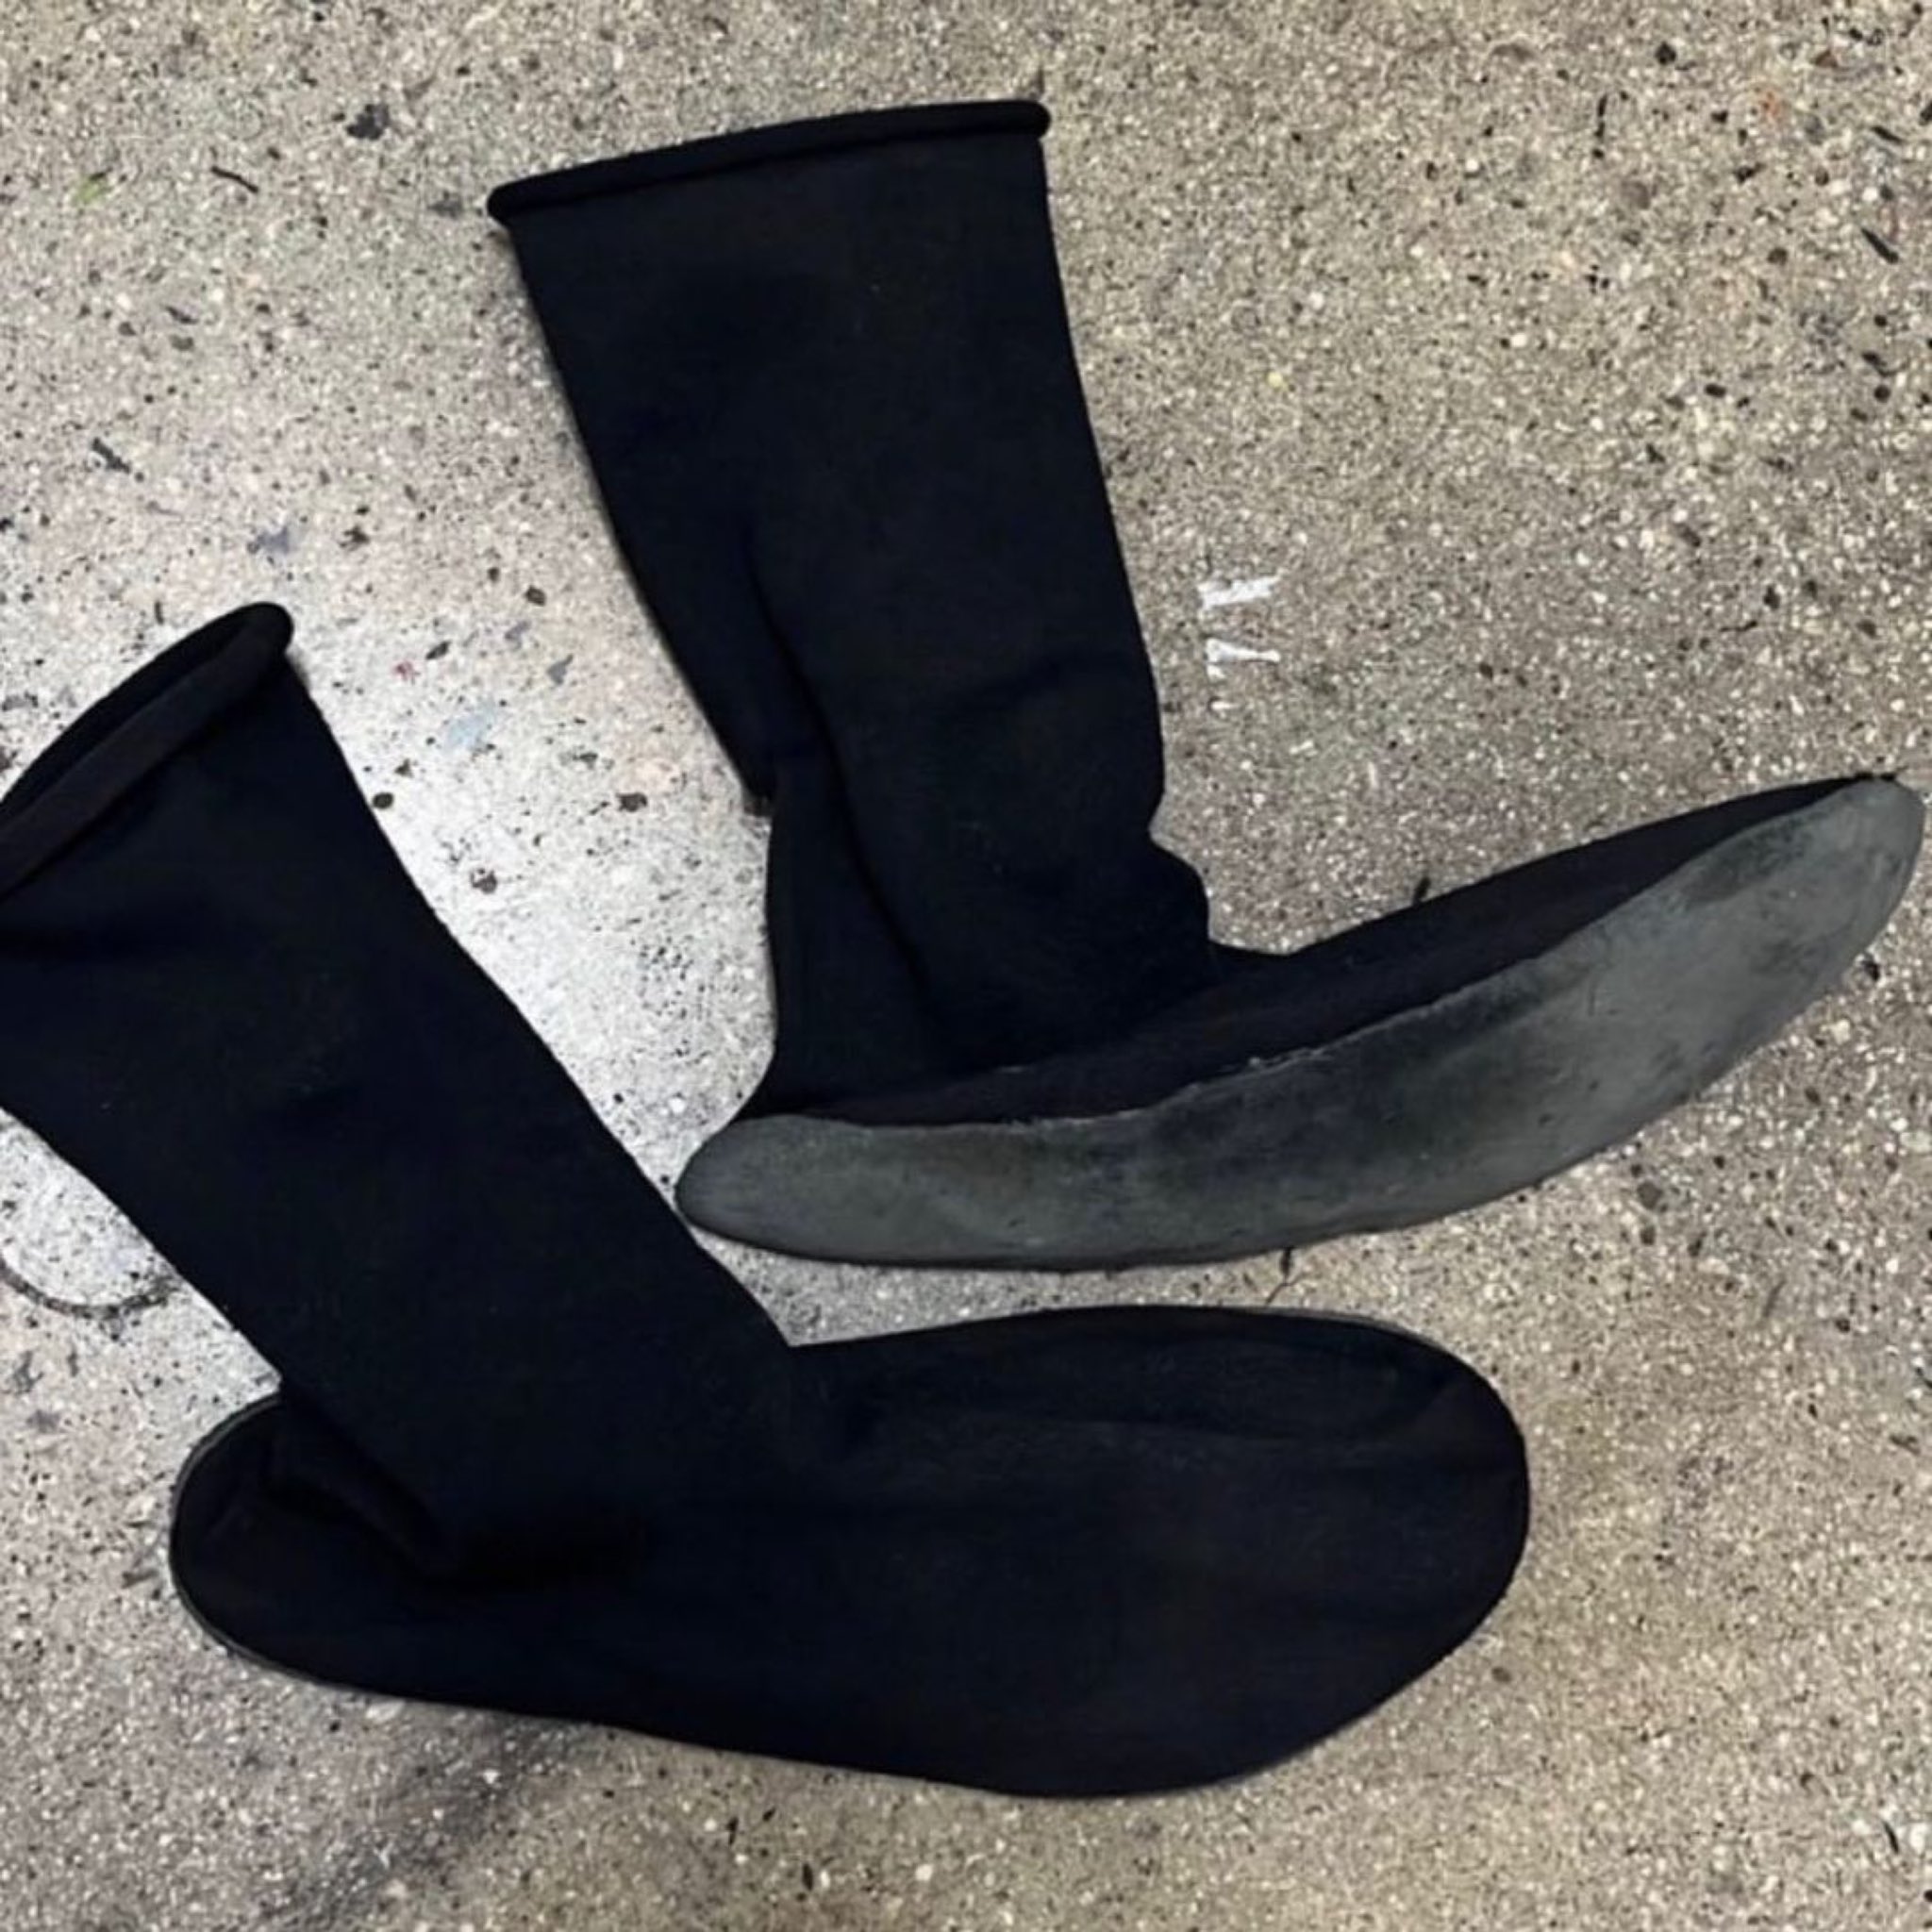 YEEZY MAFIA Twitter: "First look at a Yzy Sock sneaker prototype inspired by Japanese Boots https://t.co/oPINIBLWLP" X